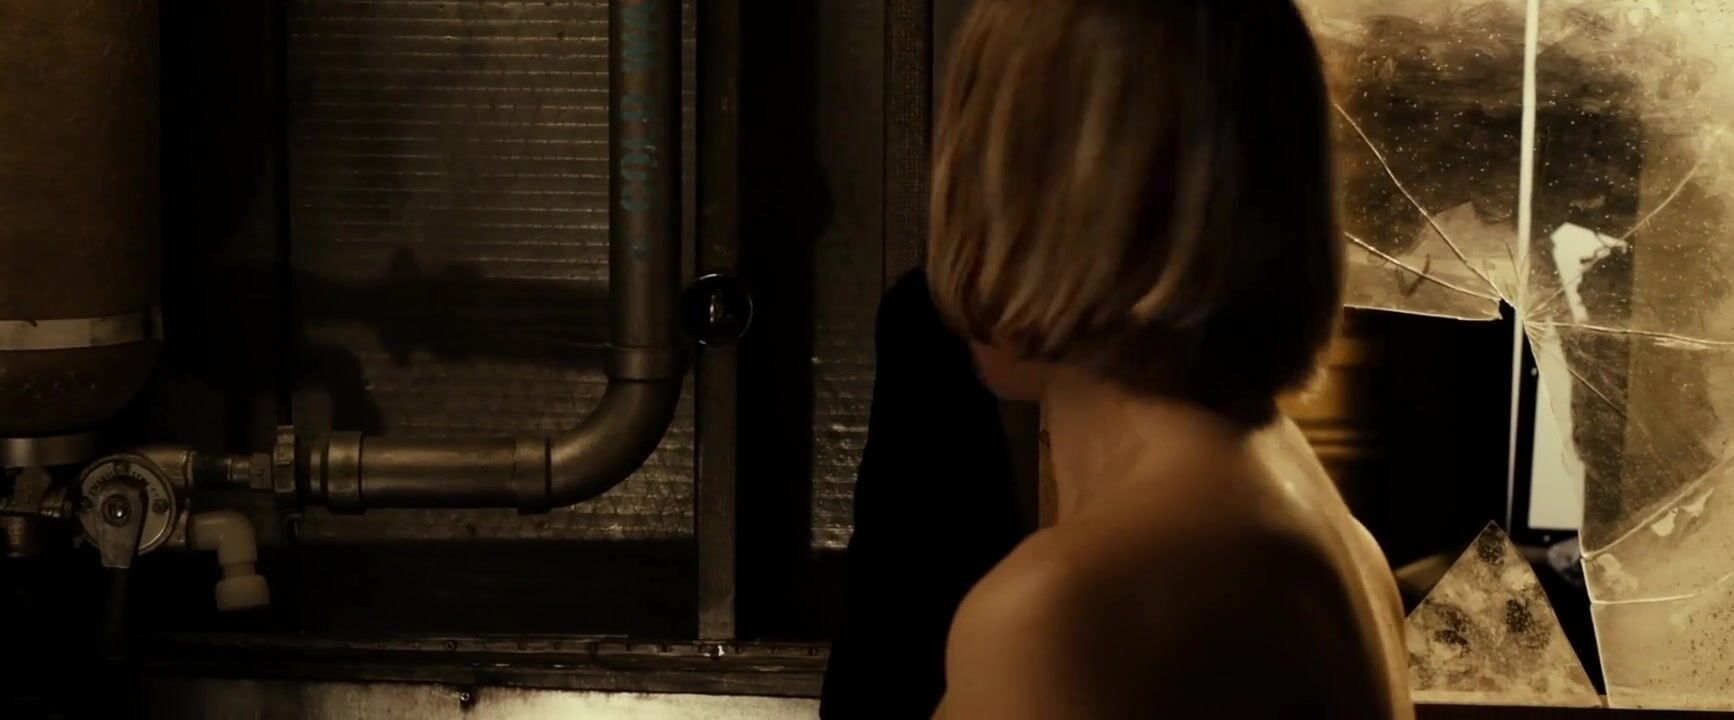 France Riddick tells story of Katee Sackhoff who takes clothes off and goes washing body (2013) Adult - 1